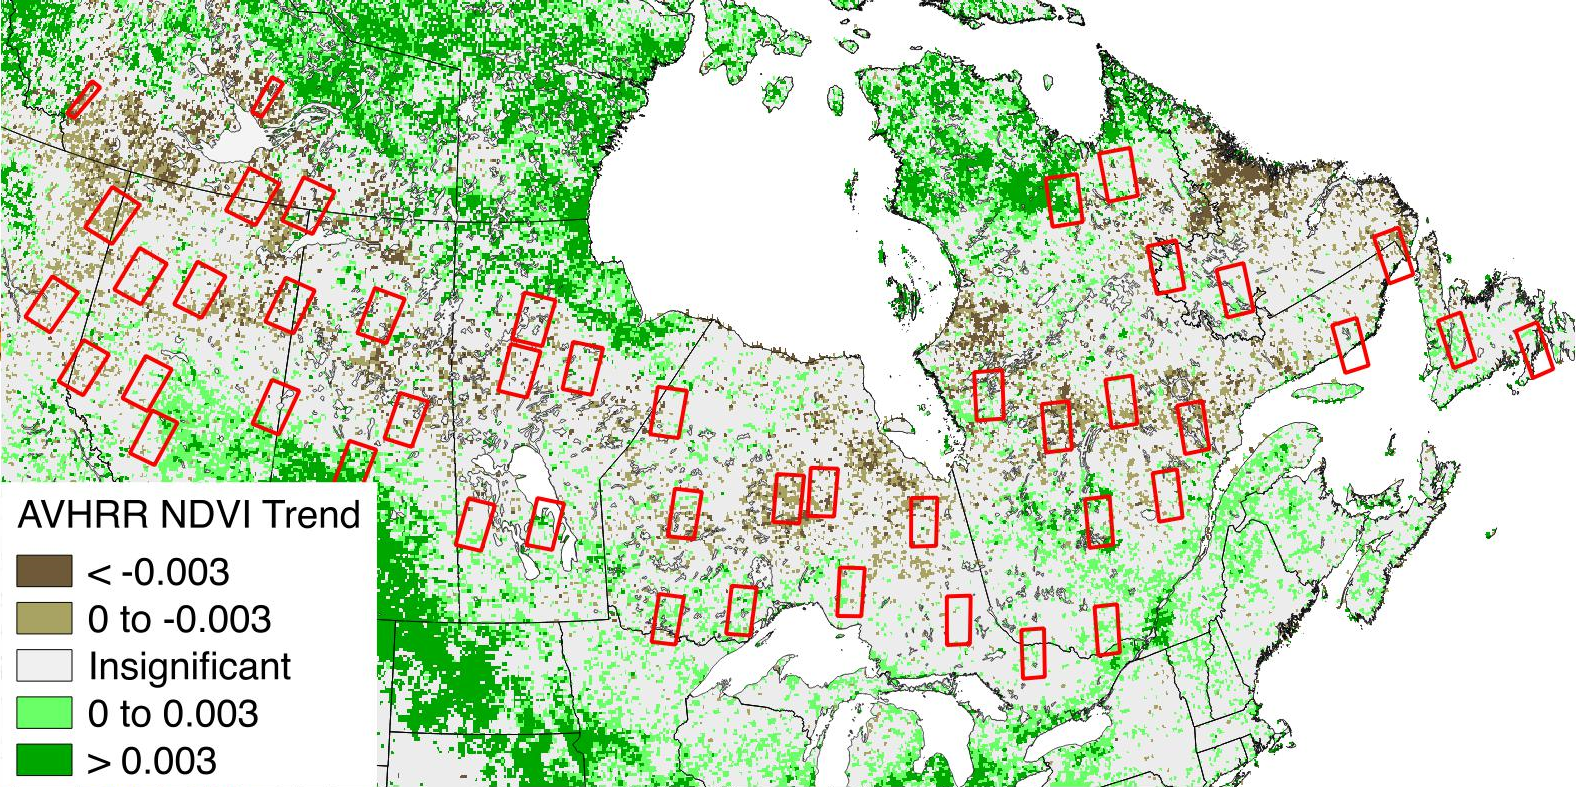 The Canadian boreal forest study area and the 46 sites used in the analysis mapped on top of AVHRR NDVI trends from Beck and Goetz (2011)